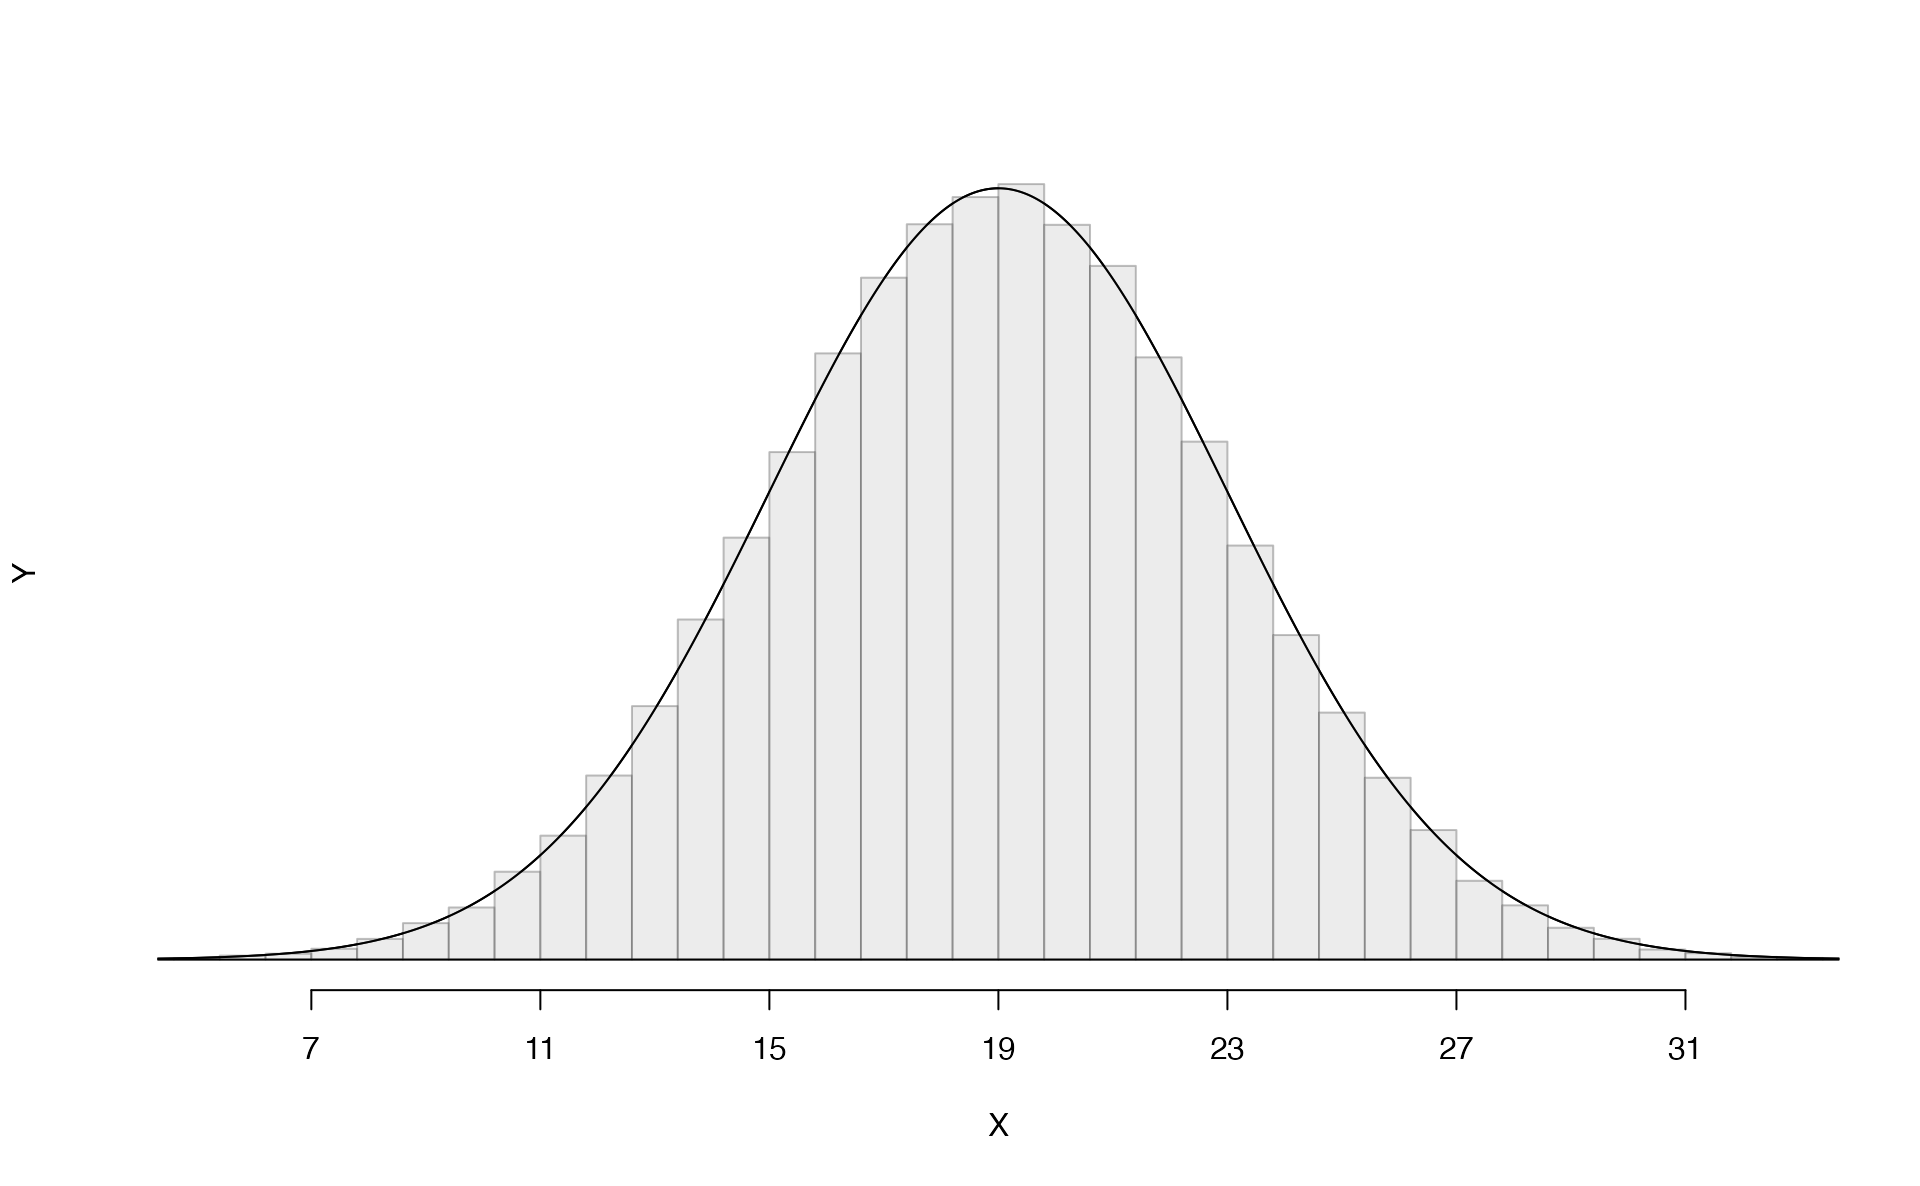 Both curves represent the normal distribution, however, they differ in their center and spread. The normal distribution with mean 0 and standard deviation 1 is called the **standard normal distribution**.